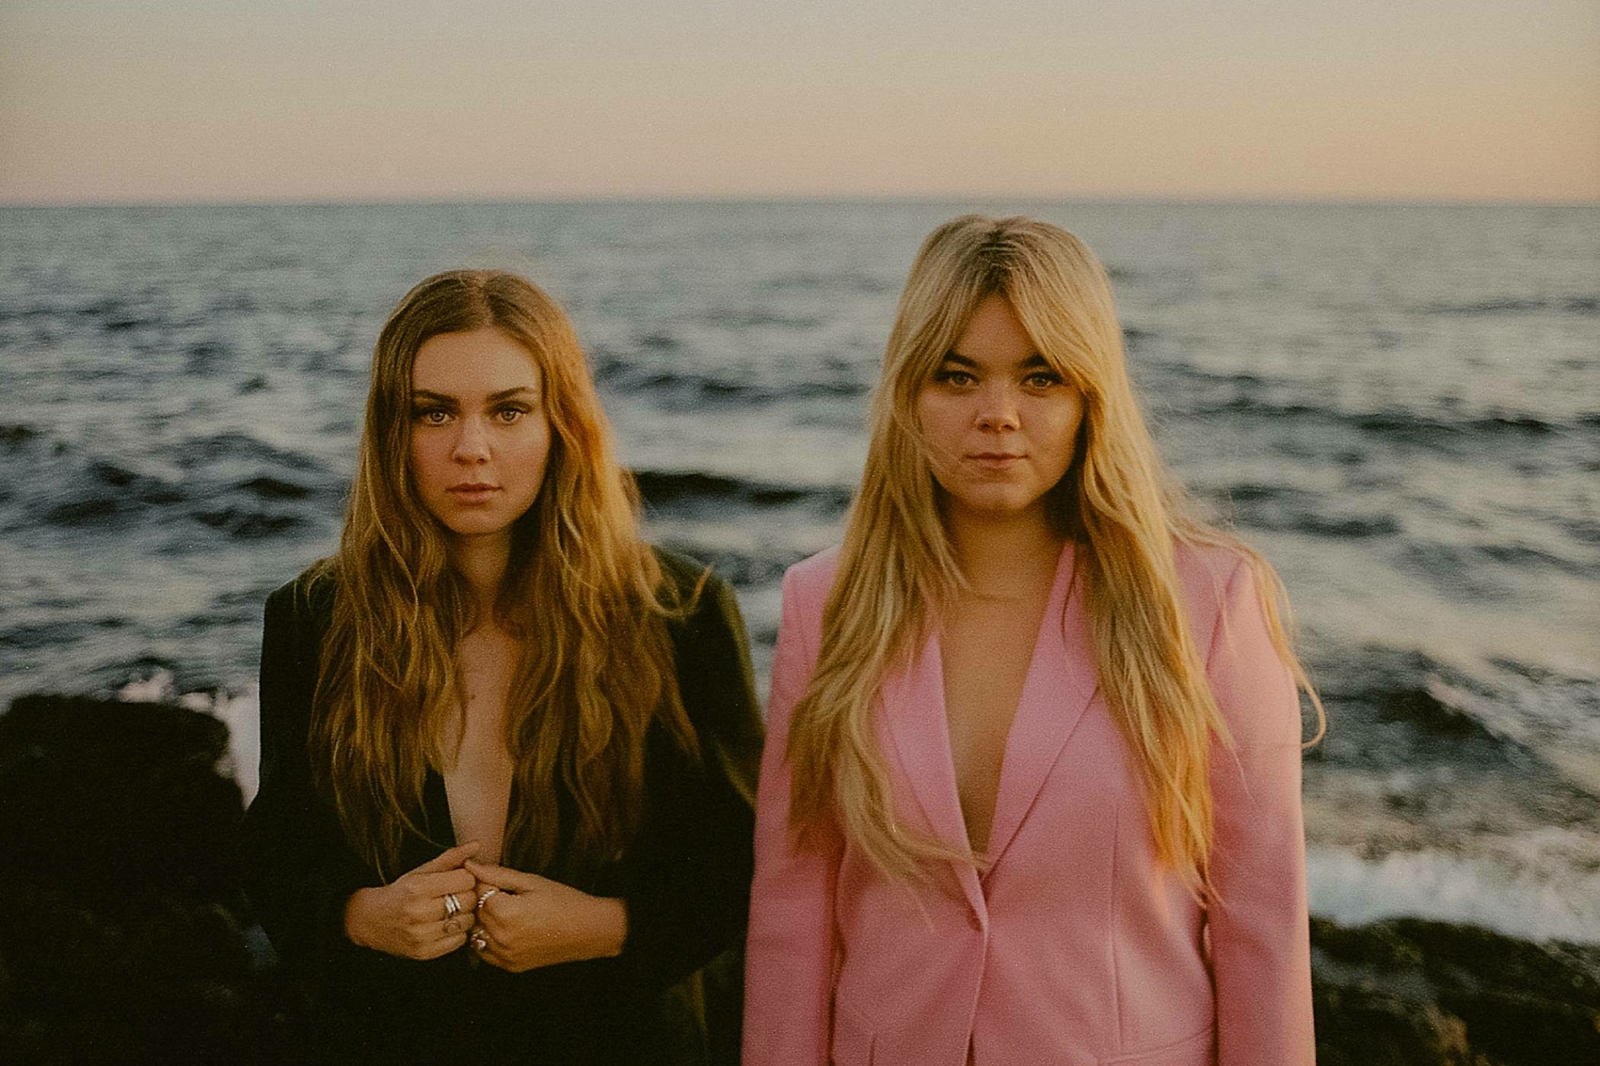 First Aid Kit offer up new track 'Turning Onto You'